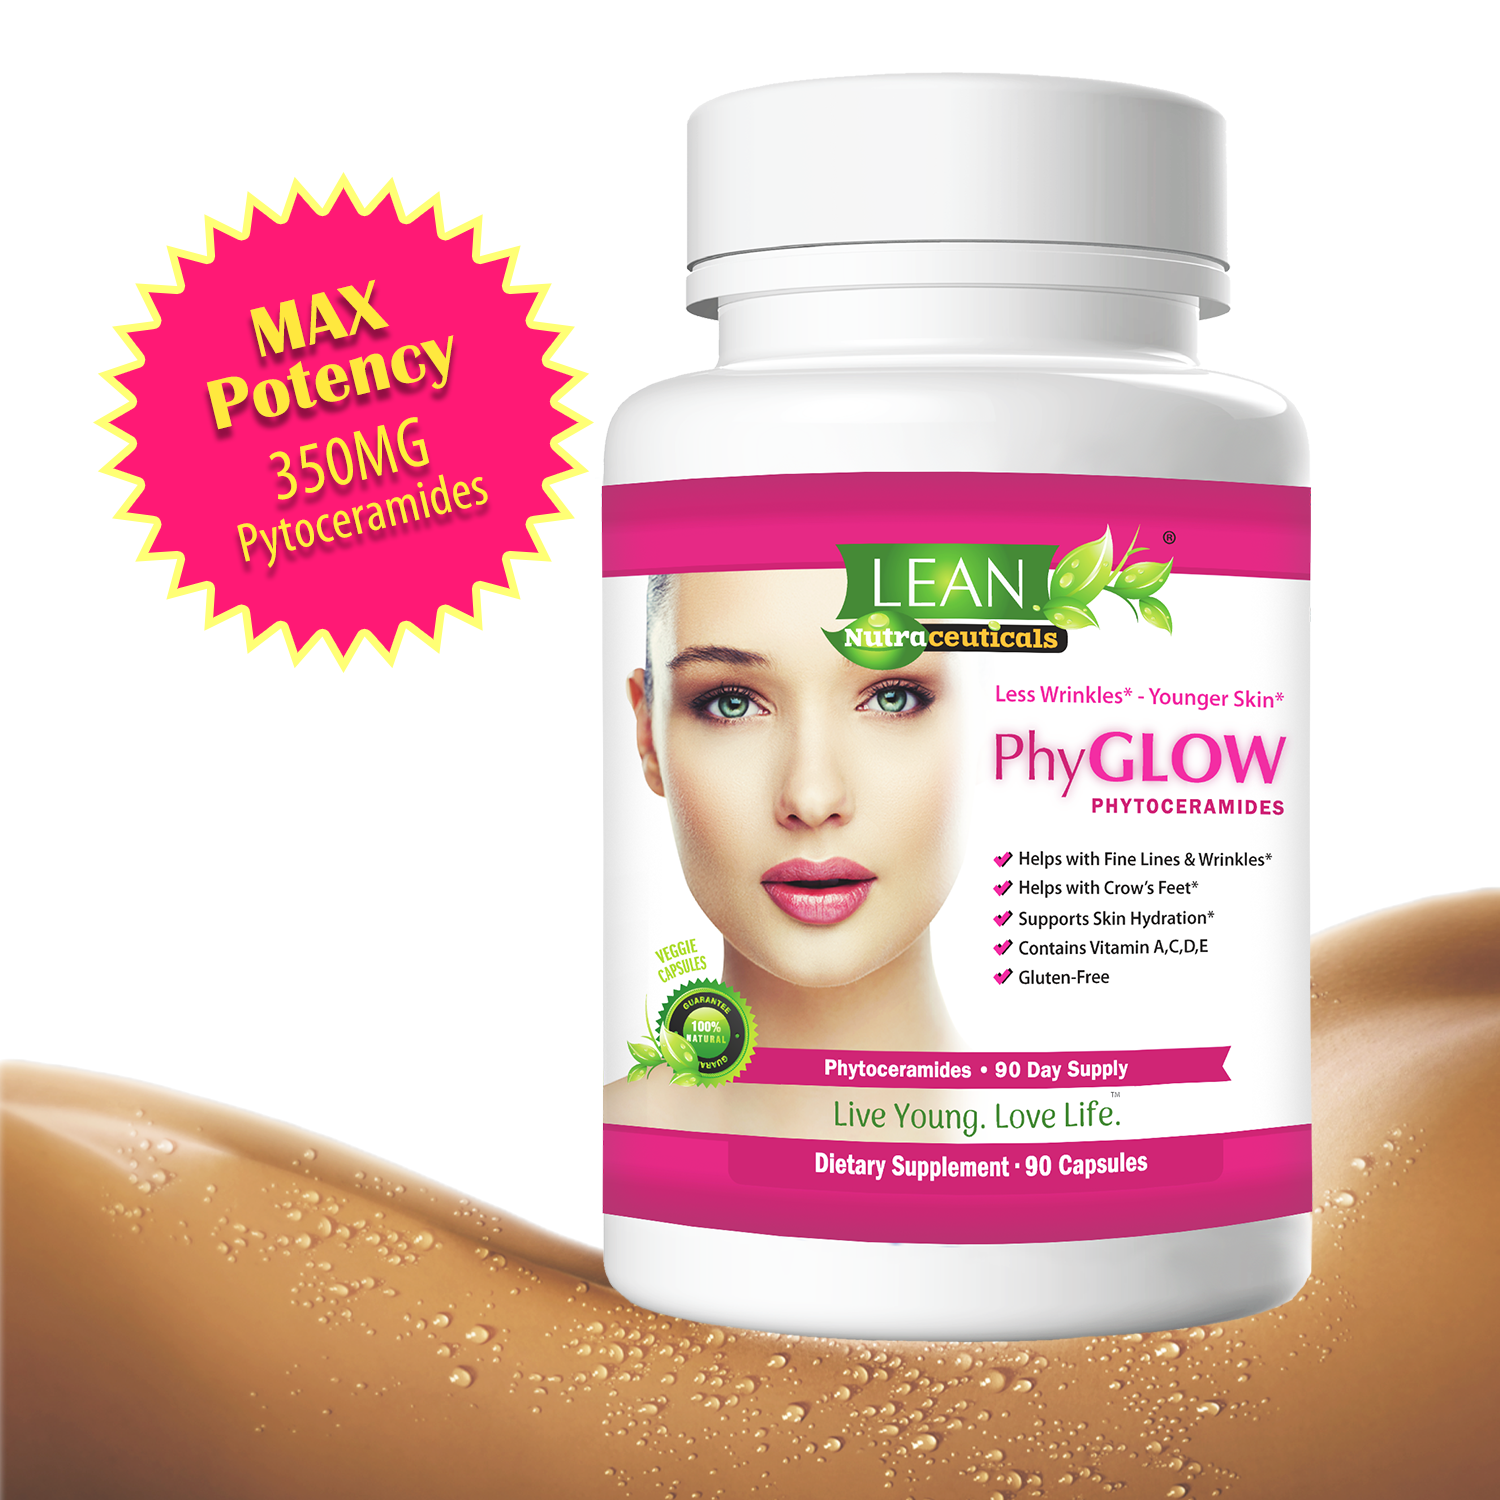 Lean Nutraceuticals Phyglow 90 Capsules Phytoceramides Max Potency